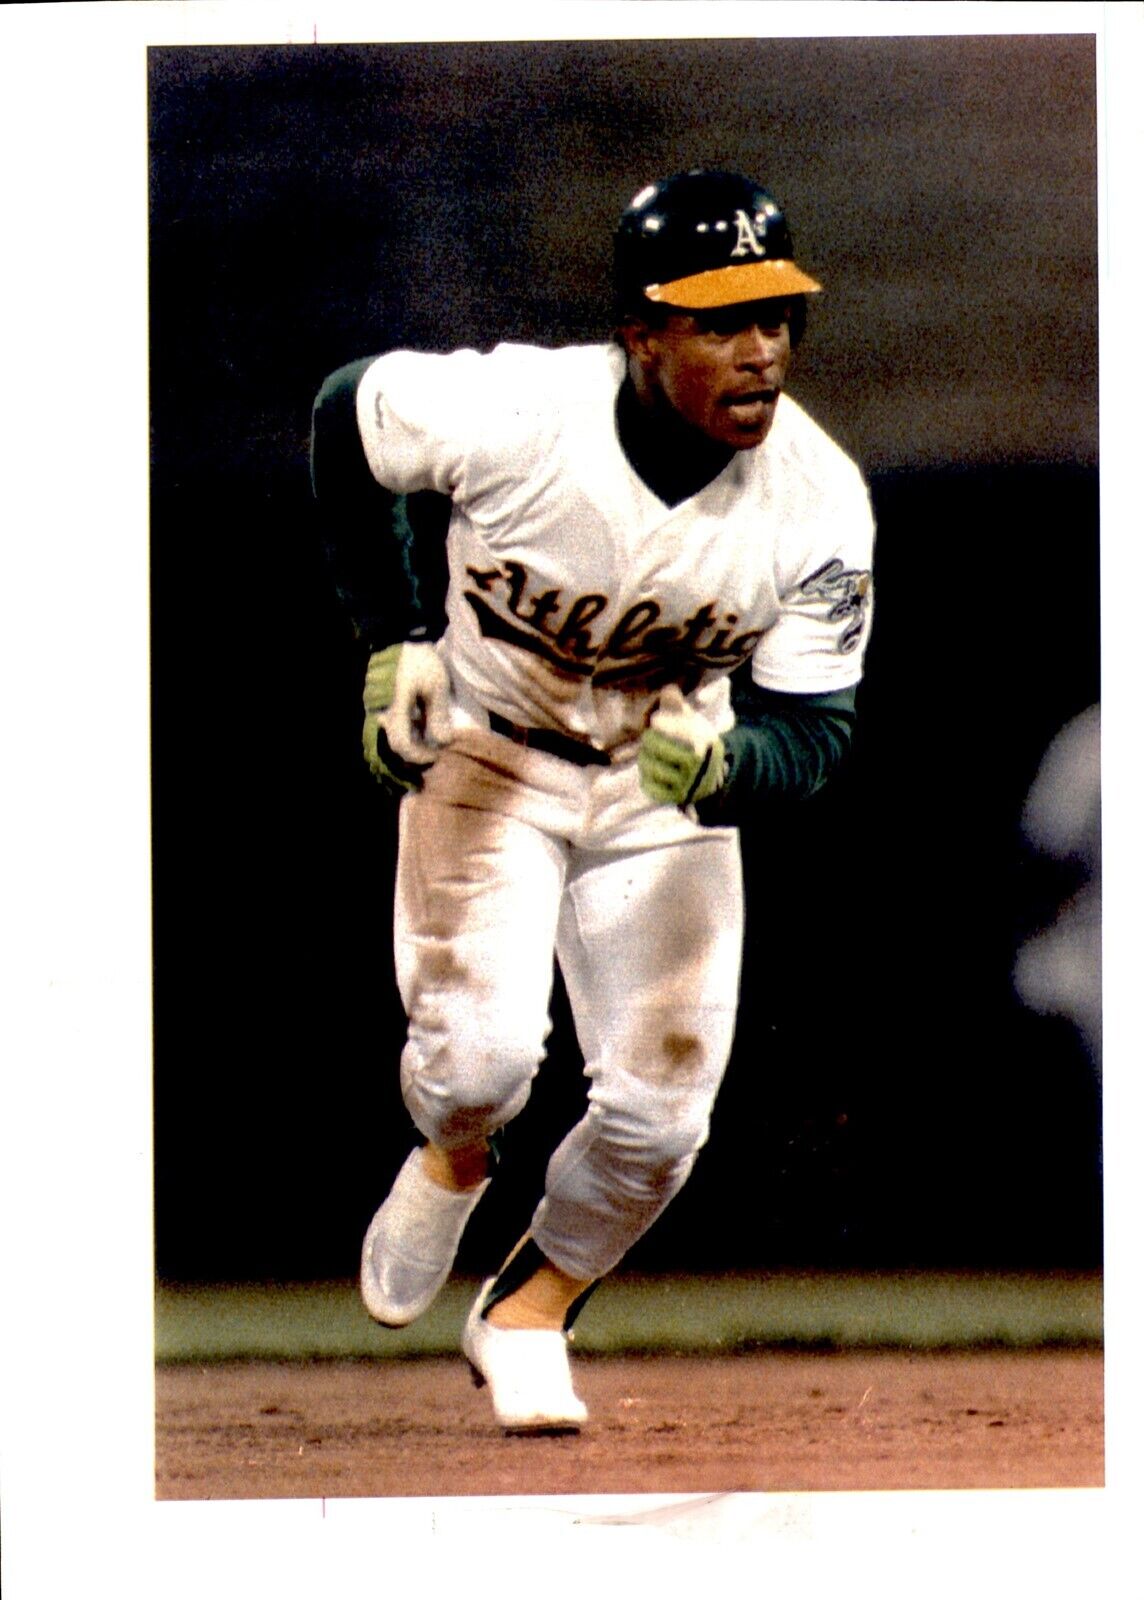 LD352 1991 Color Oversize Wire Photo RICKEY HENDERSON SCORES A\'S @ ALCS GAME